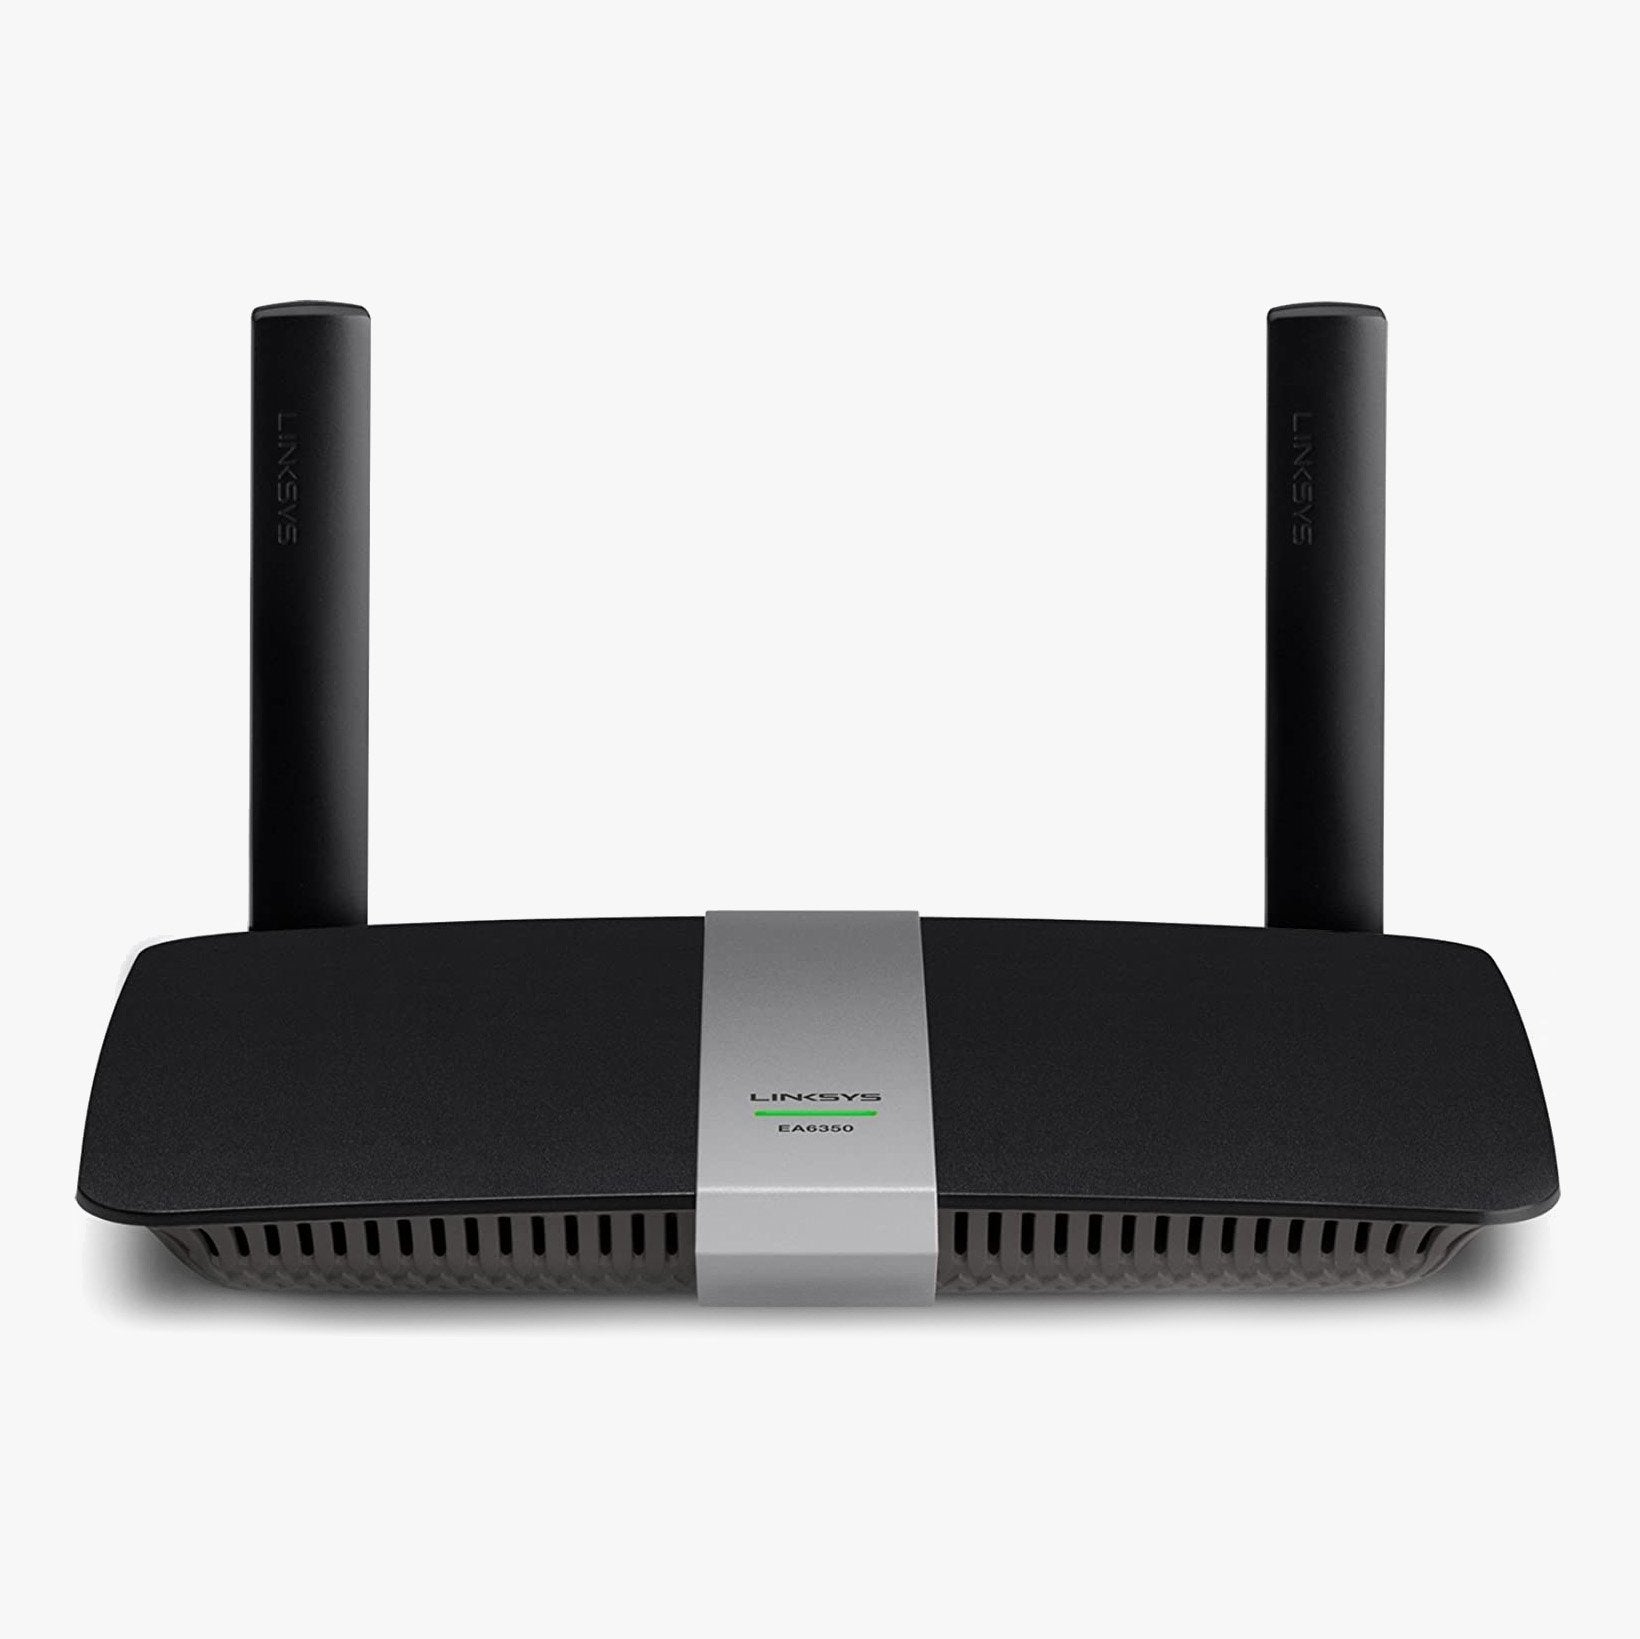 Linksys EA6350 Dual-Band AC1200 Wireless-N Router